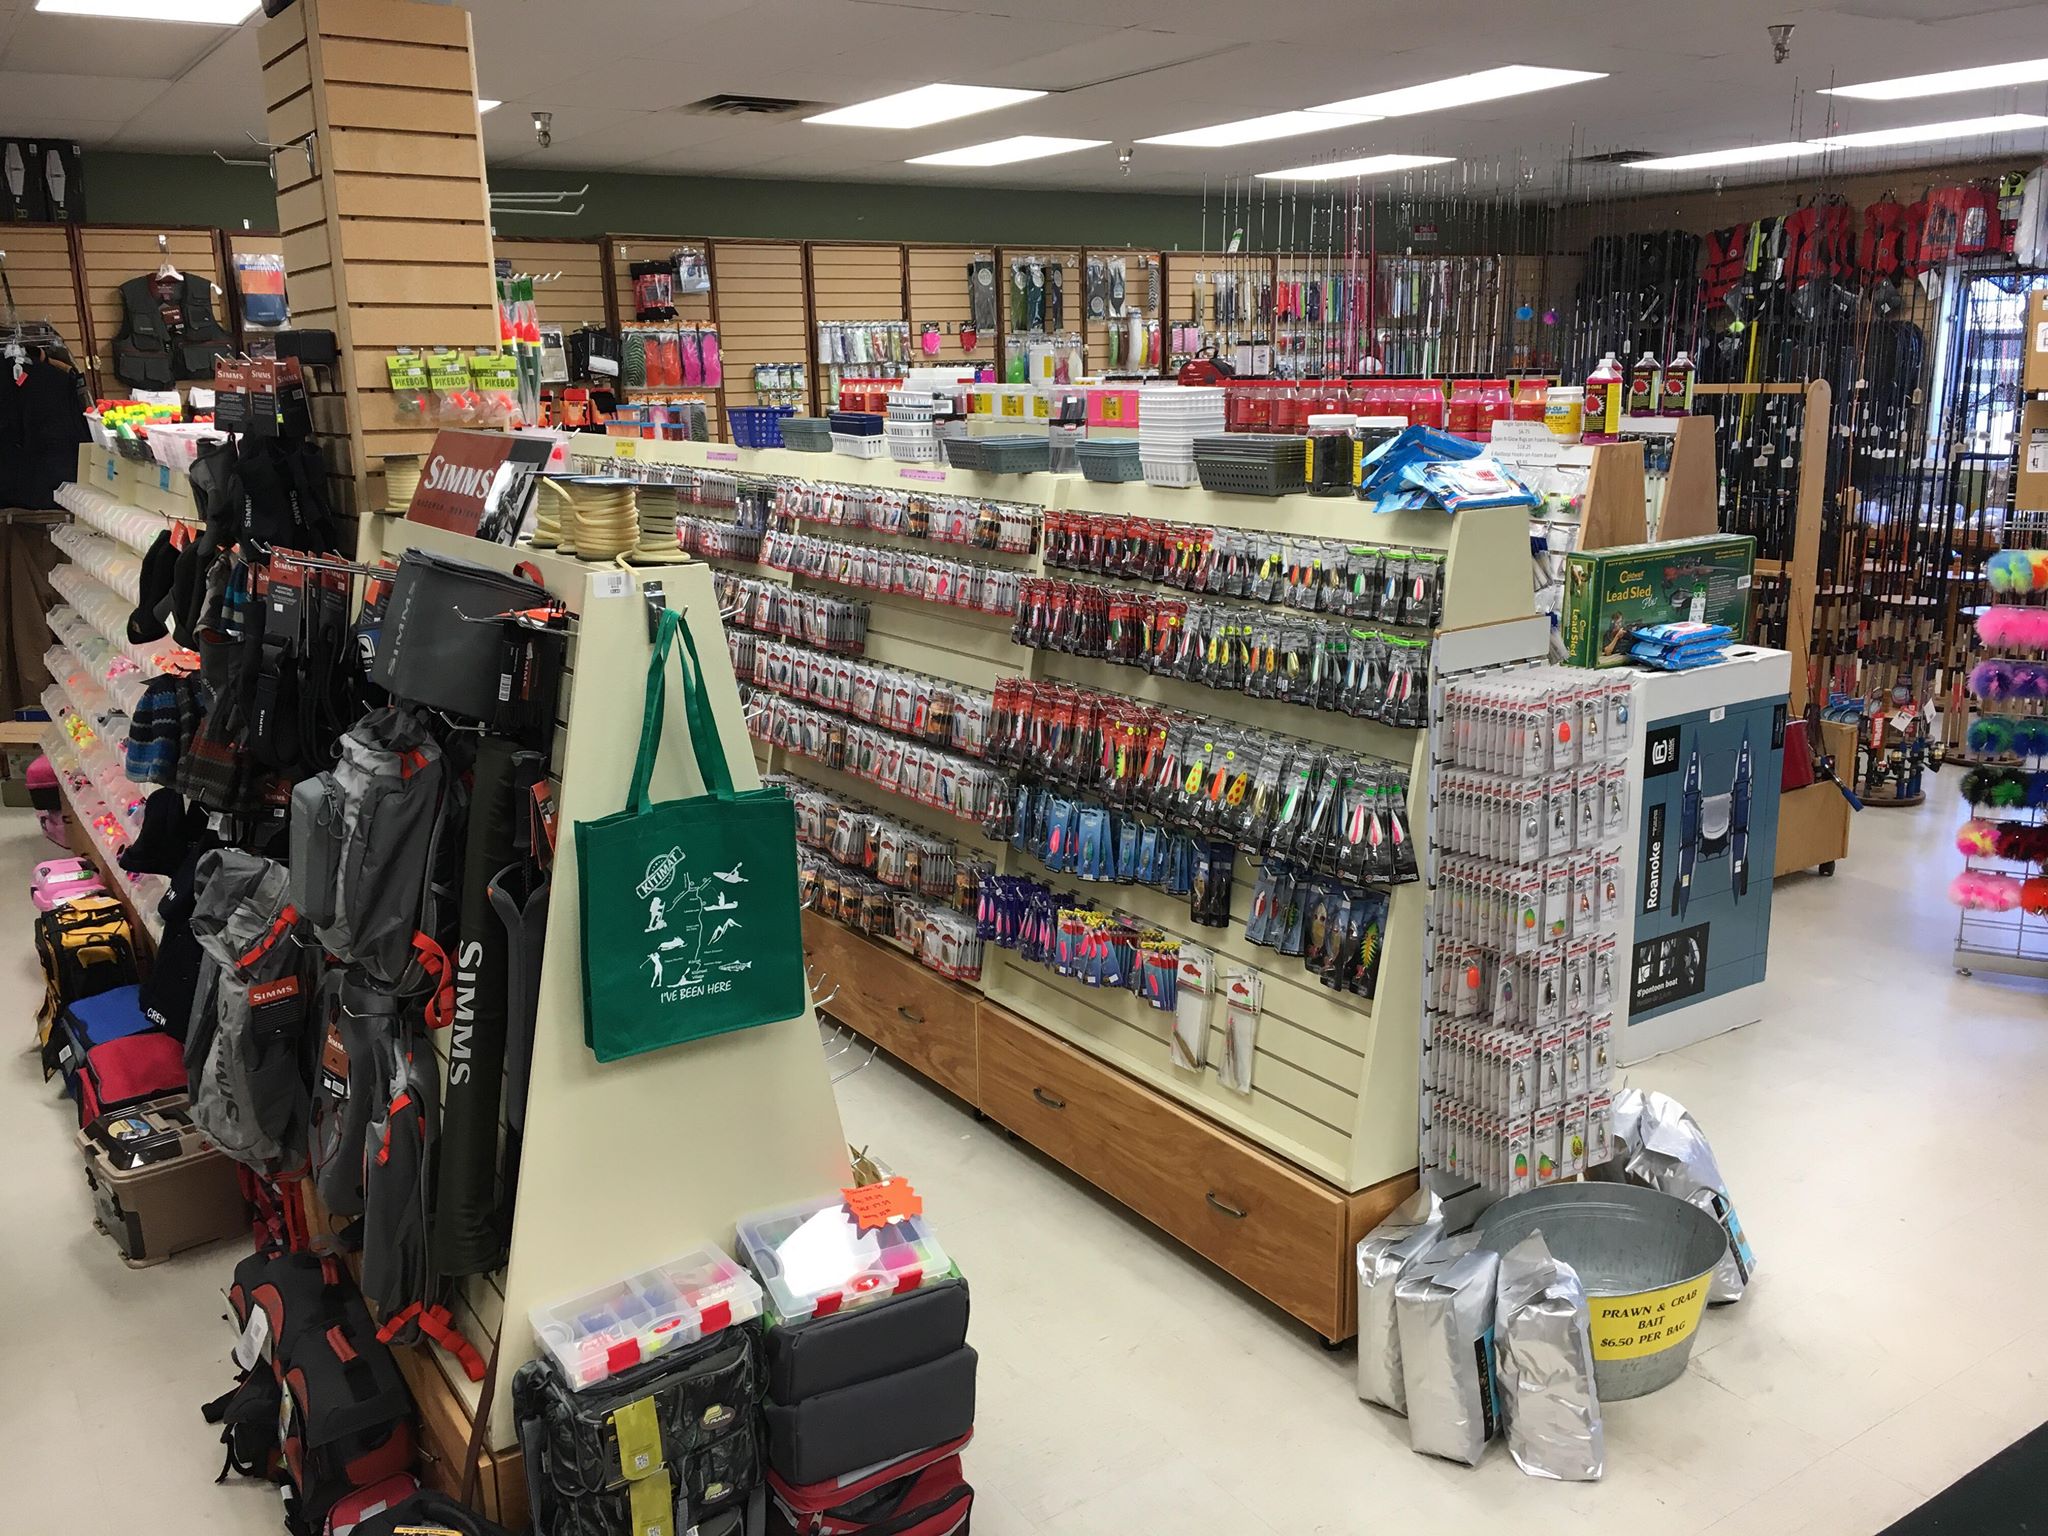 Bradleys Bait & Tackle – Offering a variety of items for the entire family,  with a focus on fishing, gift items, clothing, hunting accessories, and ammo